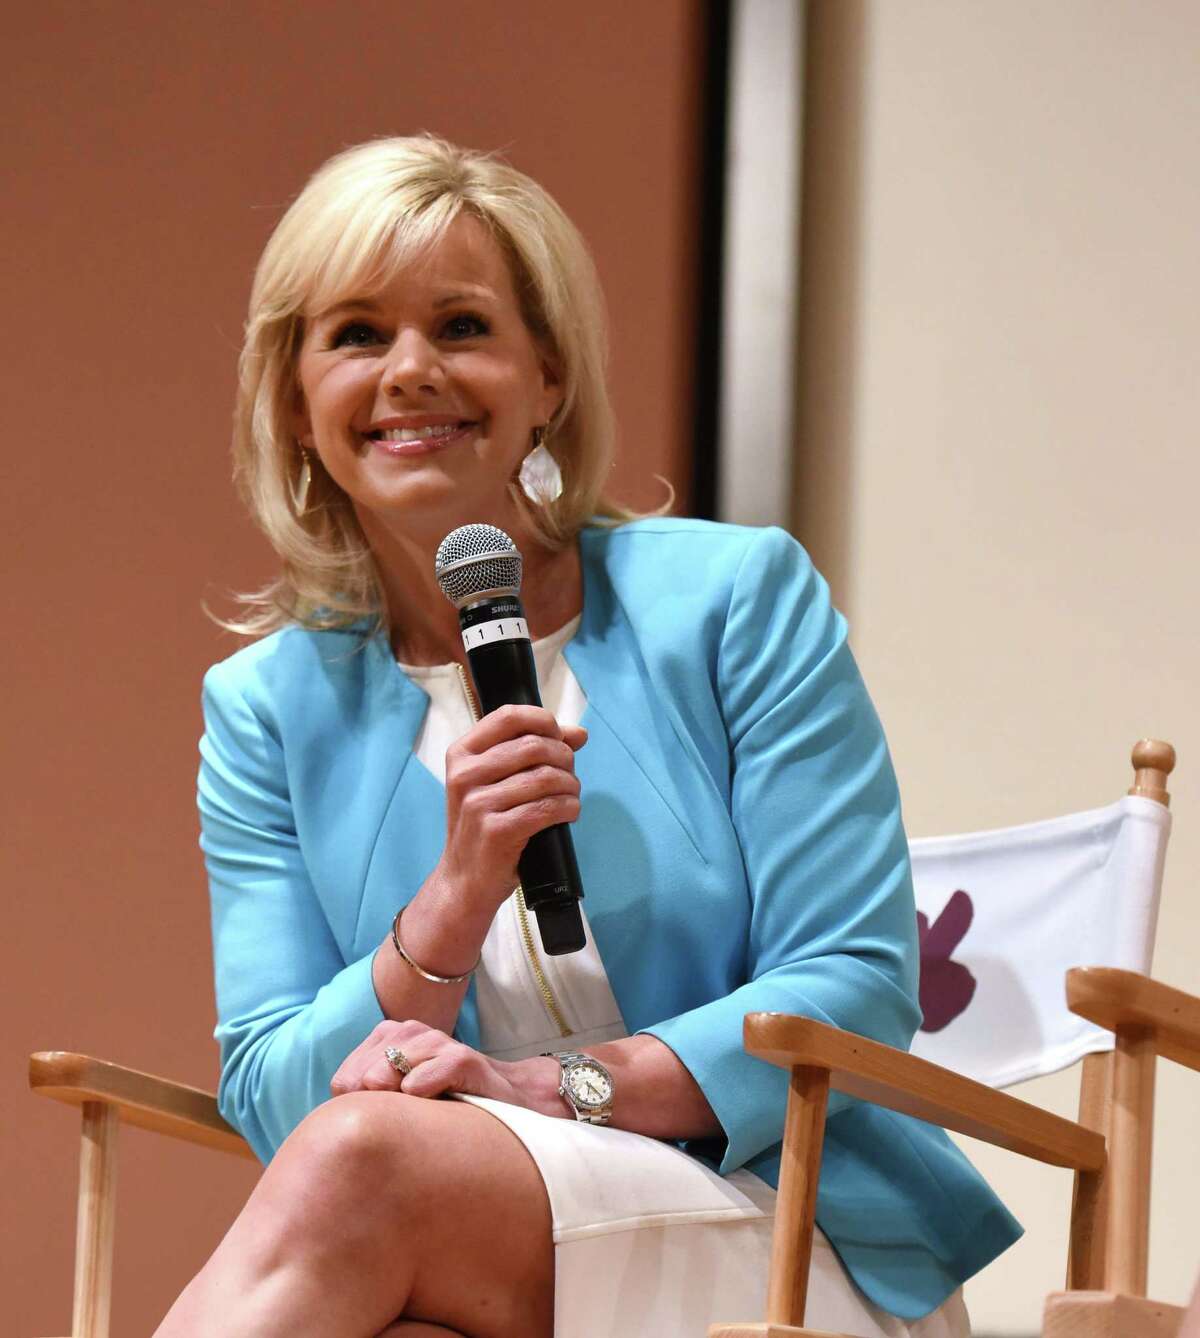 Former Fox News host Gretchen Carlson speaks during the Women at the Top: Female Empowerment in Media Panel at the 2016 Greenwich International Film Festival on June 12, 2016 in Greenwich, Connecticut. (Photo by Noam Galai/Getty Images for GIFF). This year’s festival is seeking submissions for its lineup.